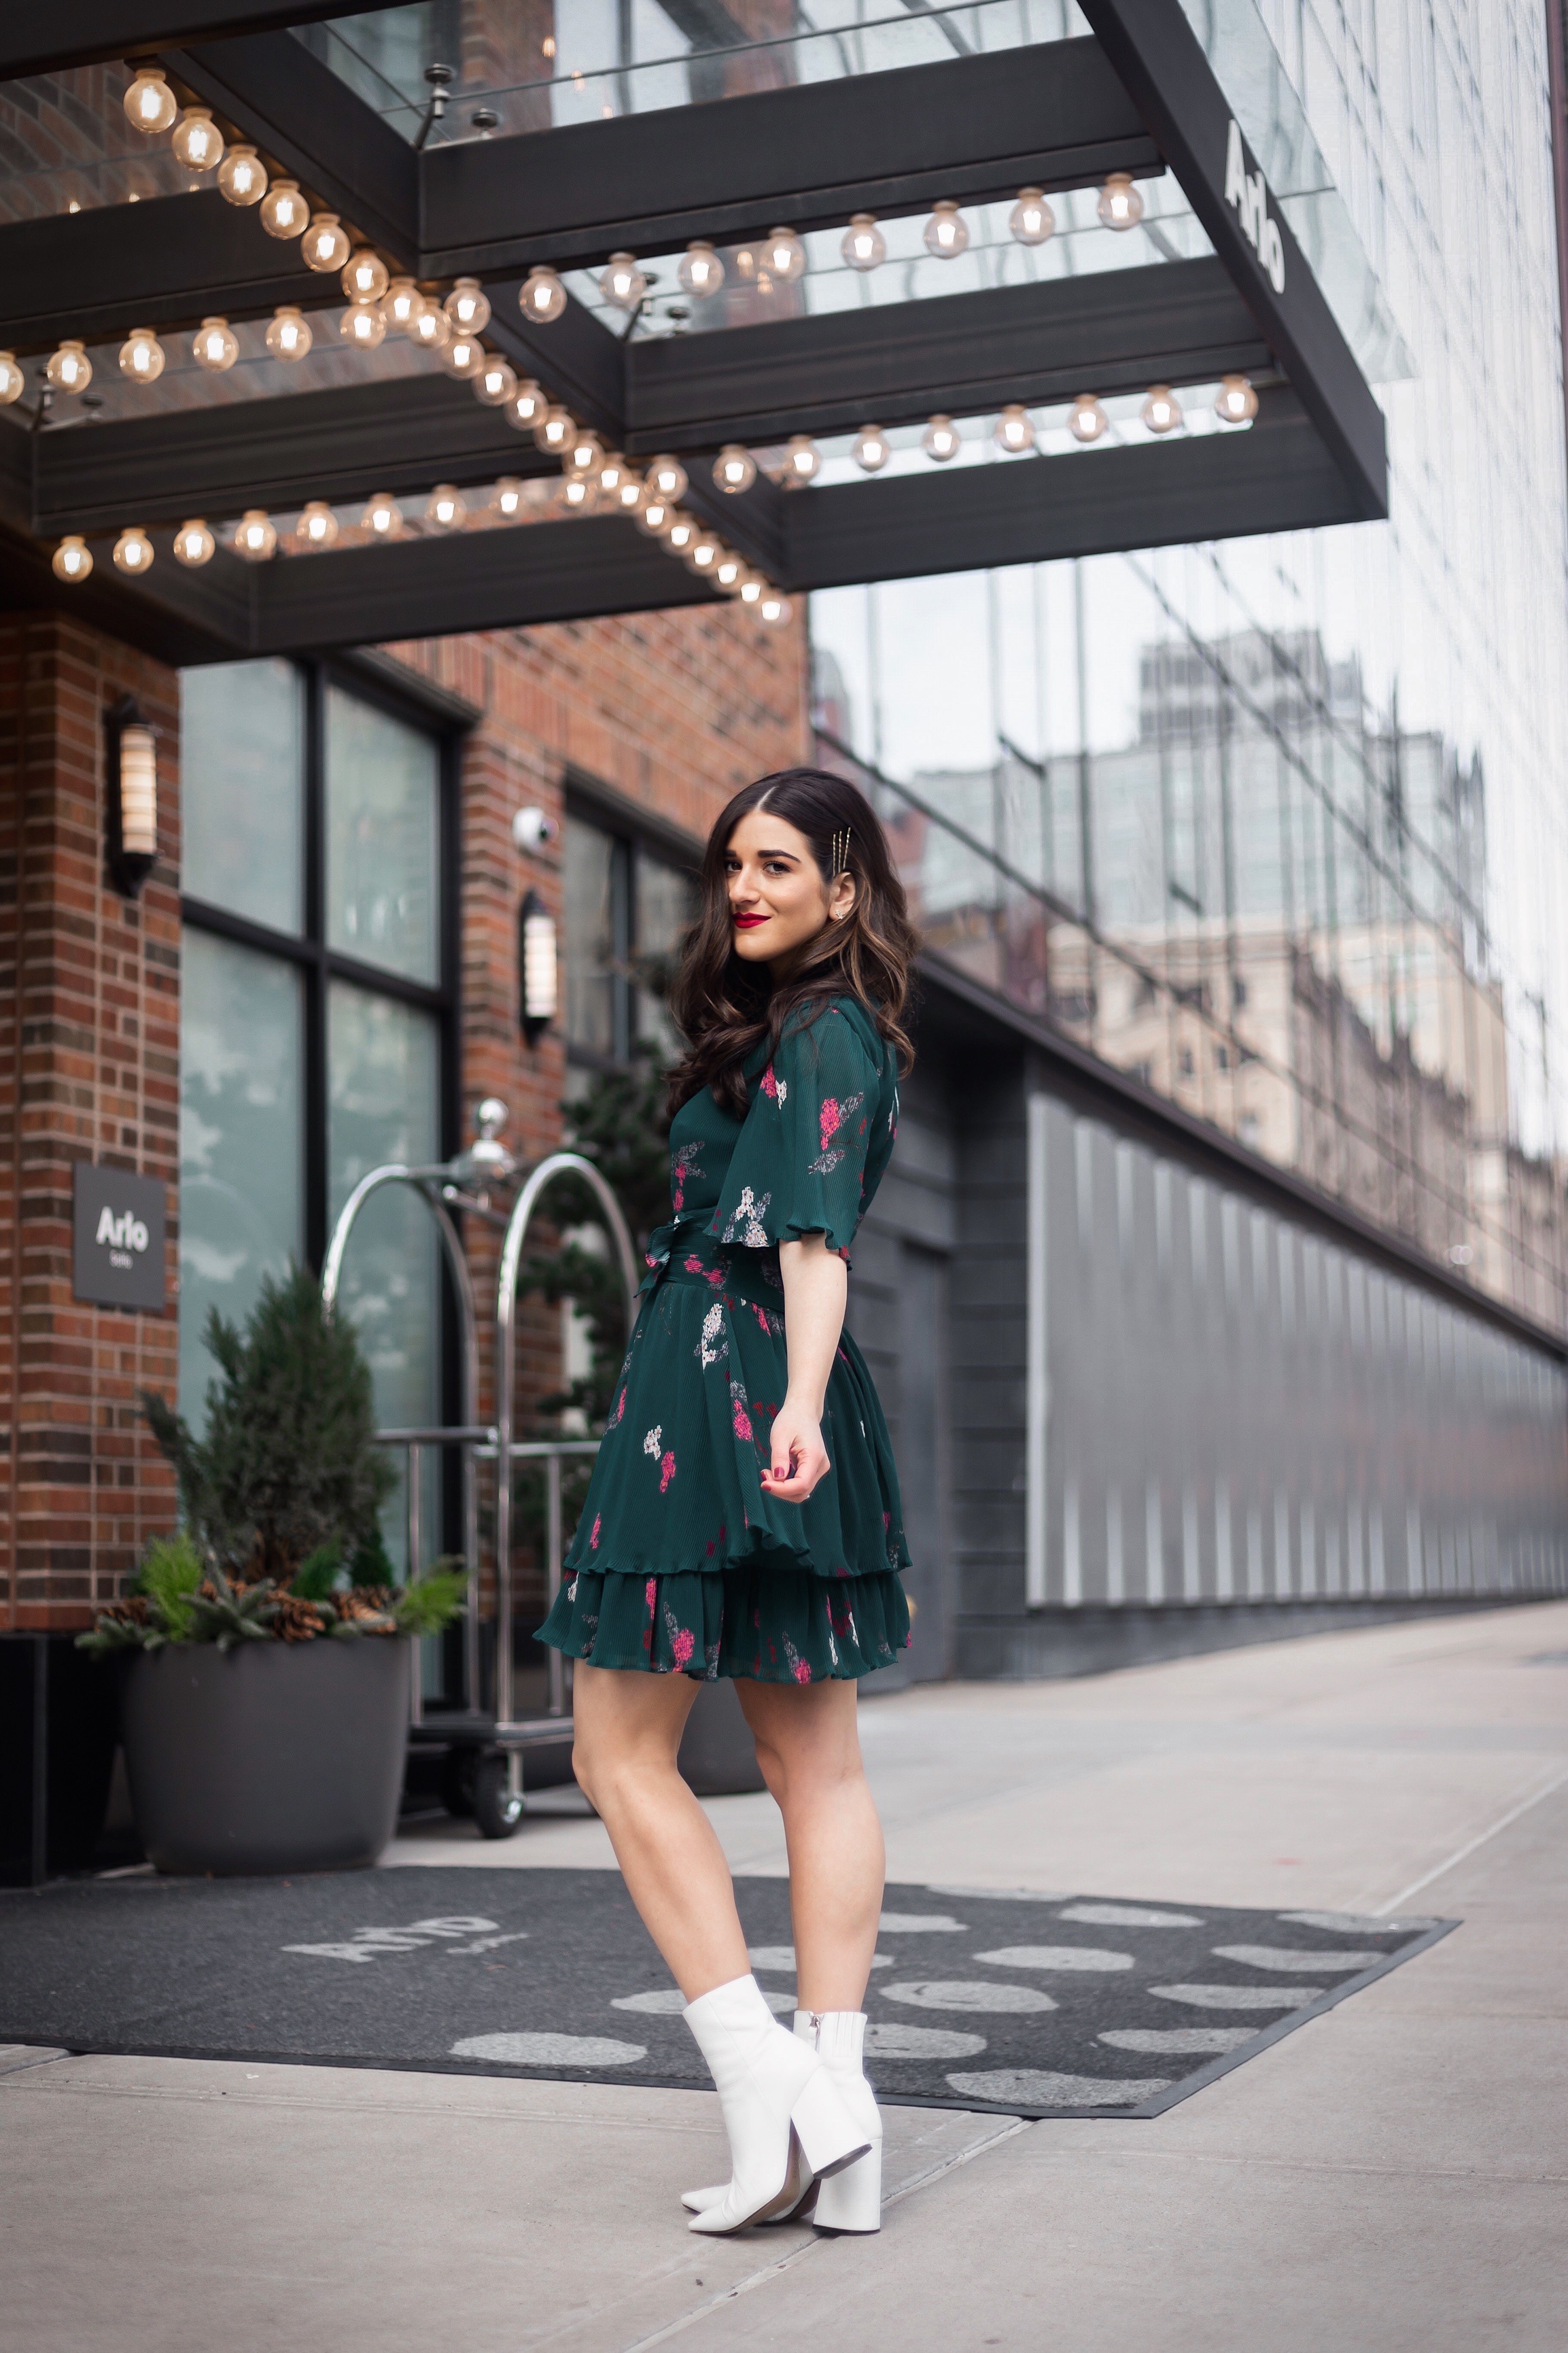 10 NYC Experiences Everyone Should Have Green Floral Dress White Booties Esther Santer Fashion Blog NYC Street Style Blogger Outfit OOTD Trendy Shopping Girl What How To Wear Bobby Pins Hairstyle Fall Look Butterfly Sleeves  Keepsake Label Arlo Soho.JPG